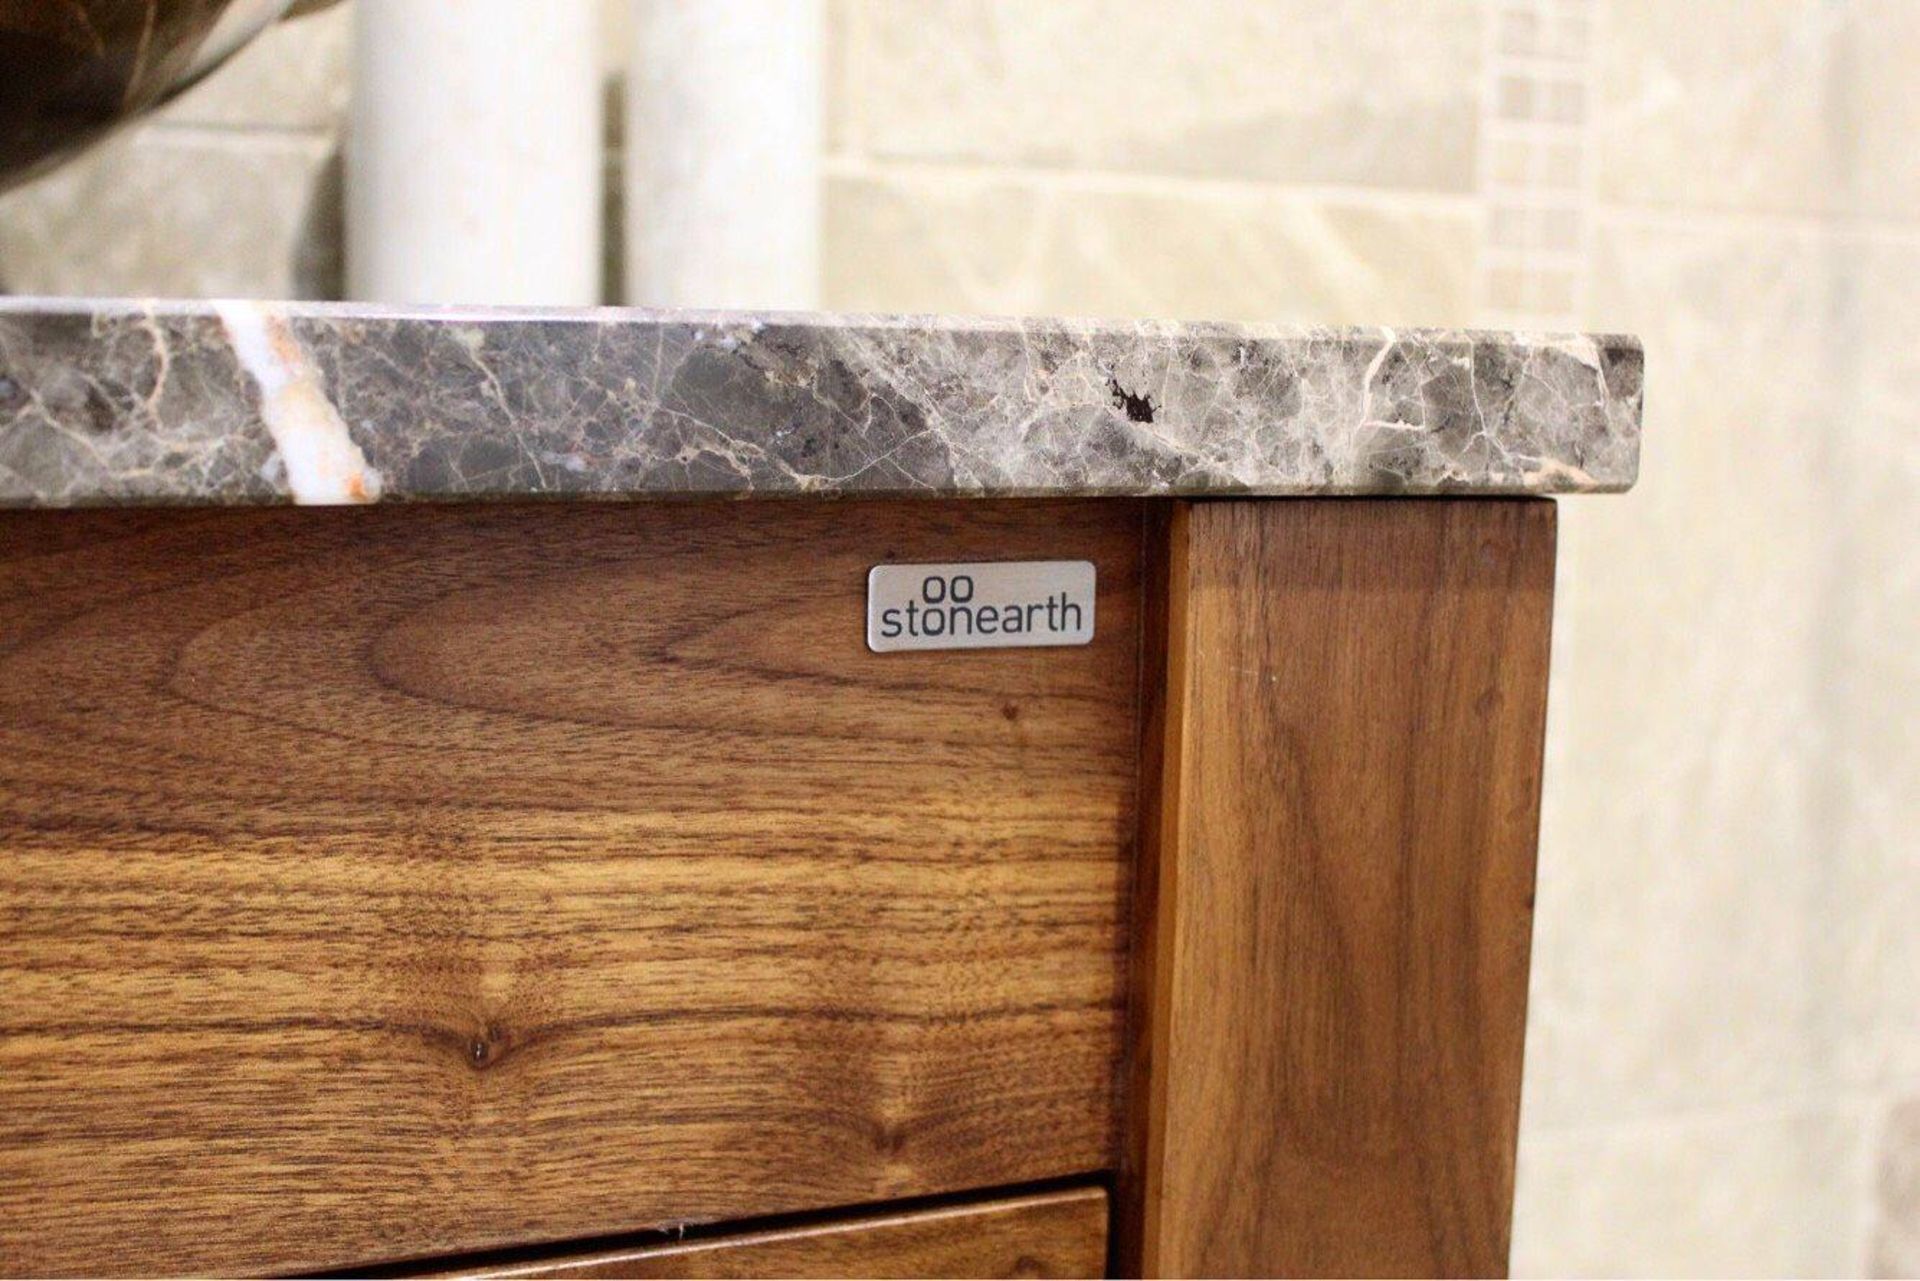 1 x Stonearth 'Finesse' Countertop Washstand - American Solid Walnut - Original RRP £1,400 - Image 4 of 12